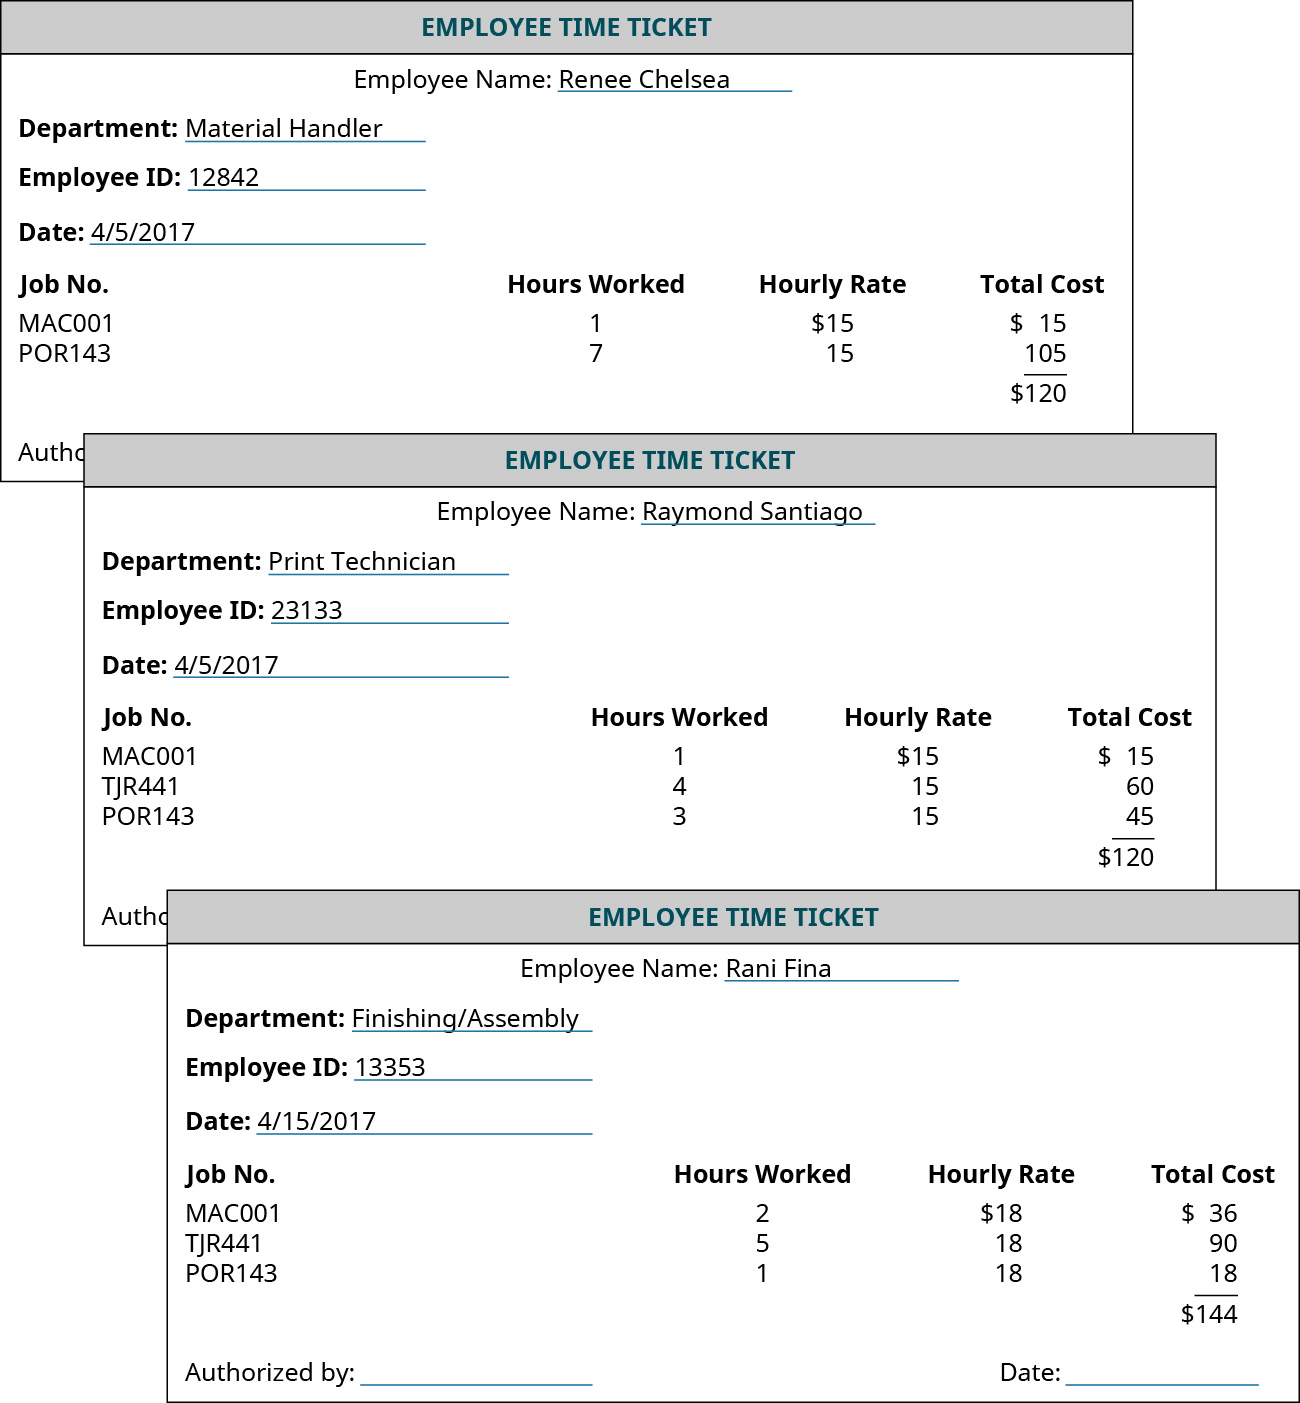 Three forms labeled “Employee Time Ticket.” They each have a place to fill out the Employee Name, Department, Employee ID, and Date. Then there are four columns the form with headings: “Job No.”, “Hours Worked”, “Hourly Rate”, and “Total Cost”. The first ticket is Renee Chelsea, material handler, ID# 12842, 4/5/2017 with the following information: MAC001 1, 15, 15; POR143, 7,15,105. Her total cost is added to be 120. The second ticket is Raymond Santiago, Print Technician, ID#23133, 4/5/2017 with the following information: MAC001 1, 15, 15; TJR441 4, 15, 60, POR143, 3, 15, 45. His total is 120. The last ticket is Rani Fina, Finishing/Assembly, ID#13353, 4/15/2017 with the following information: MAC001, 2, 18, 36; TJR441 5, 18, 90; POR143, 1, 18, 18; for a total of 144. Each ticket has a place on the bottom to be authorized with a signature and a date.